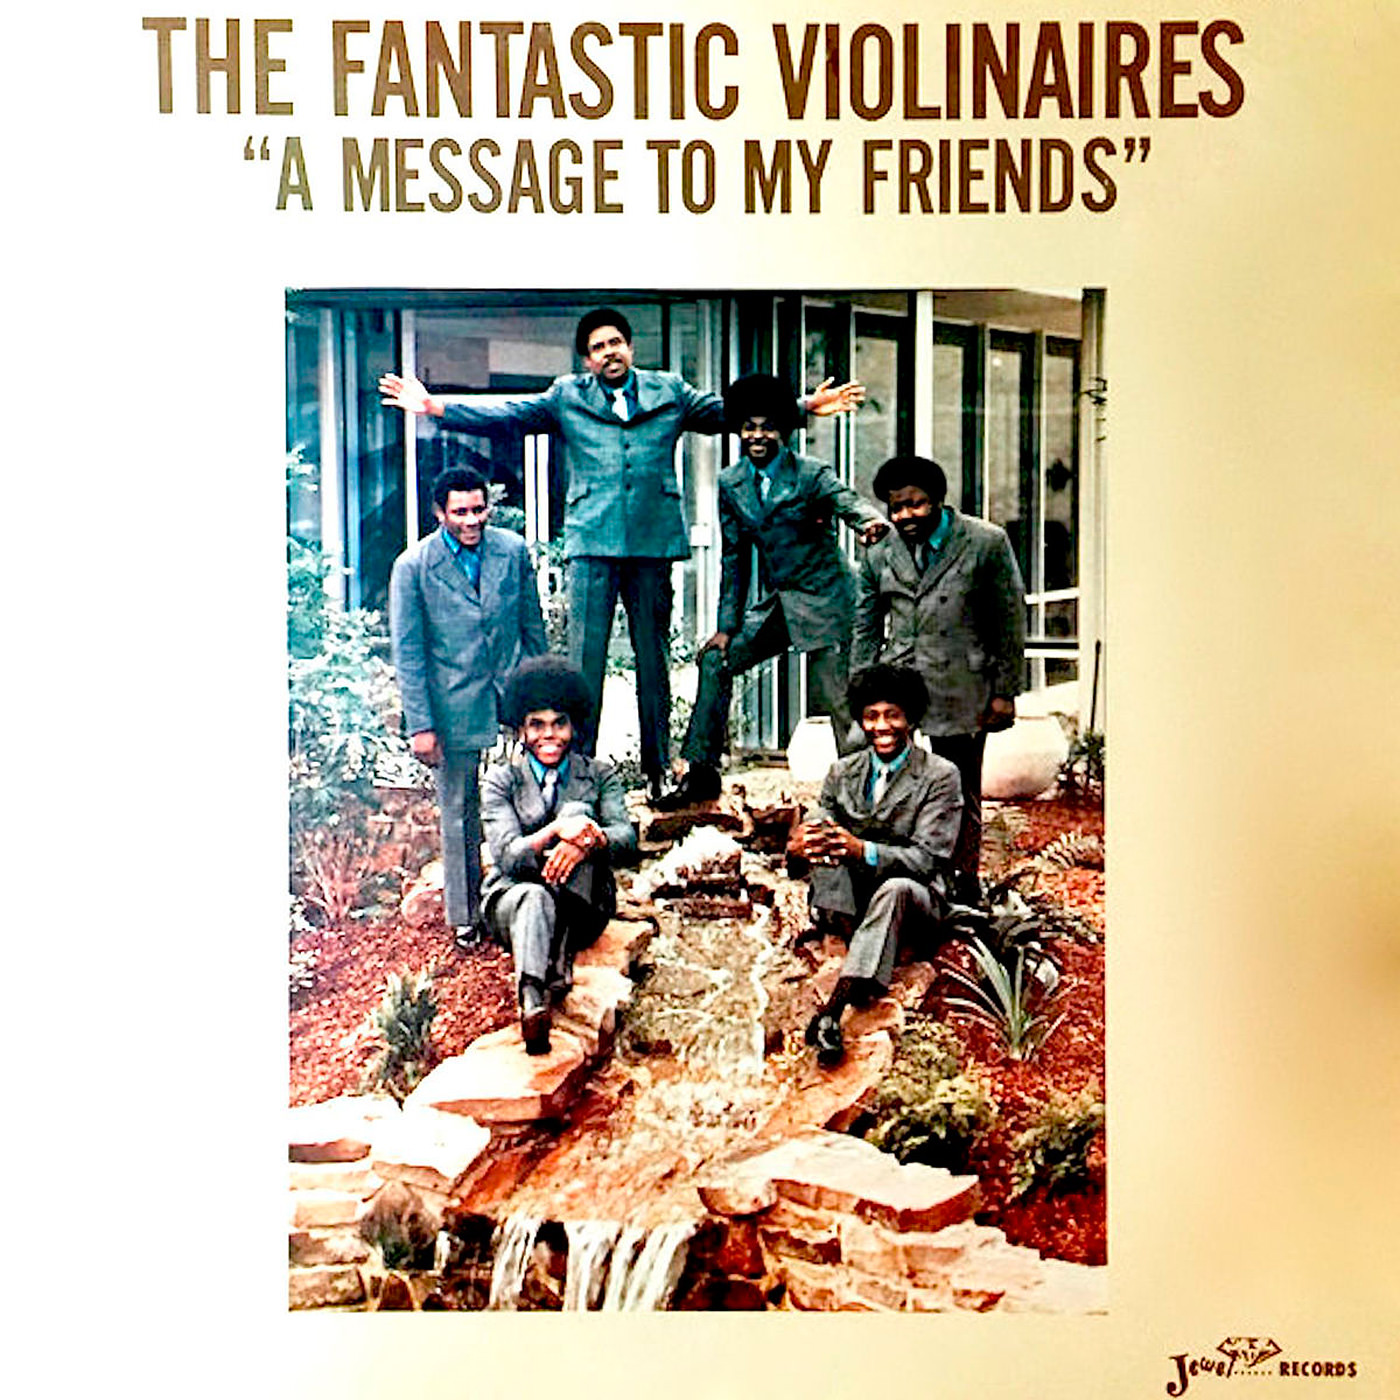 The Violinaires – The Fantastic Violinaires “A Message to My Friends” (1976) [Qobuz FLAC 24bit/96kHz]